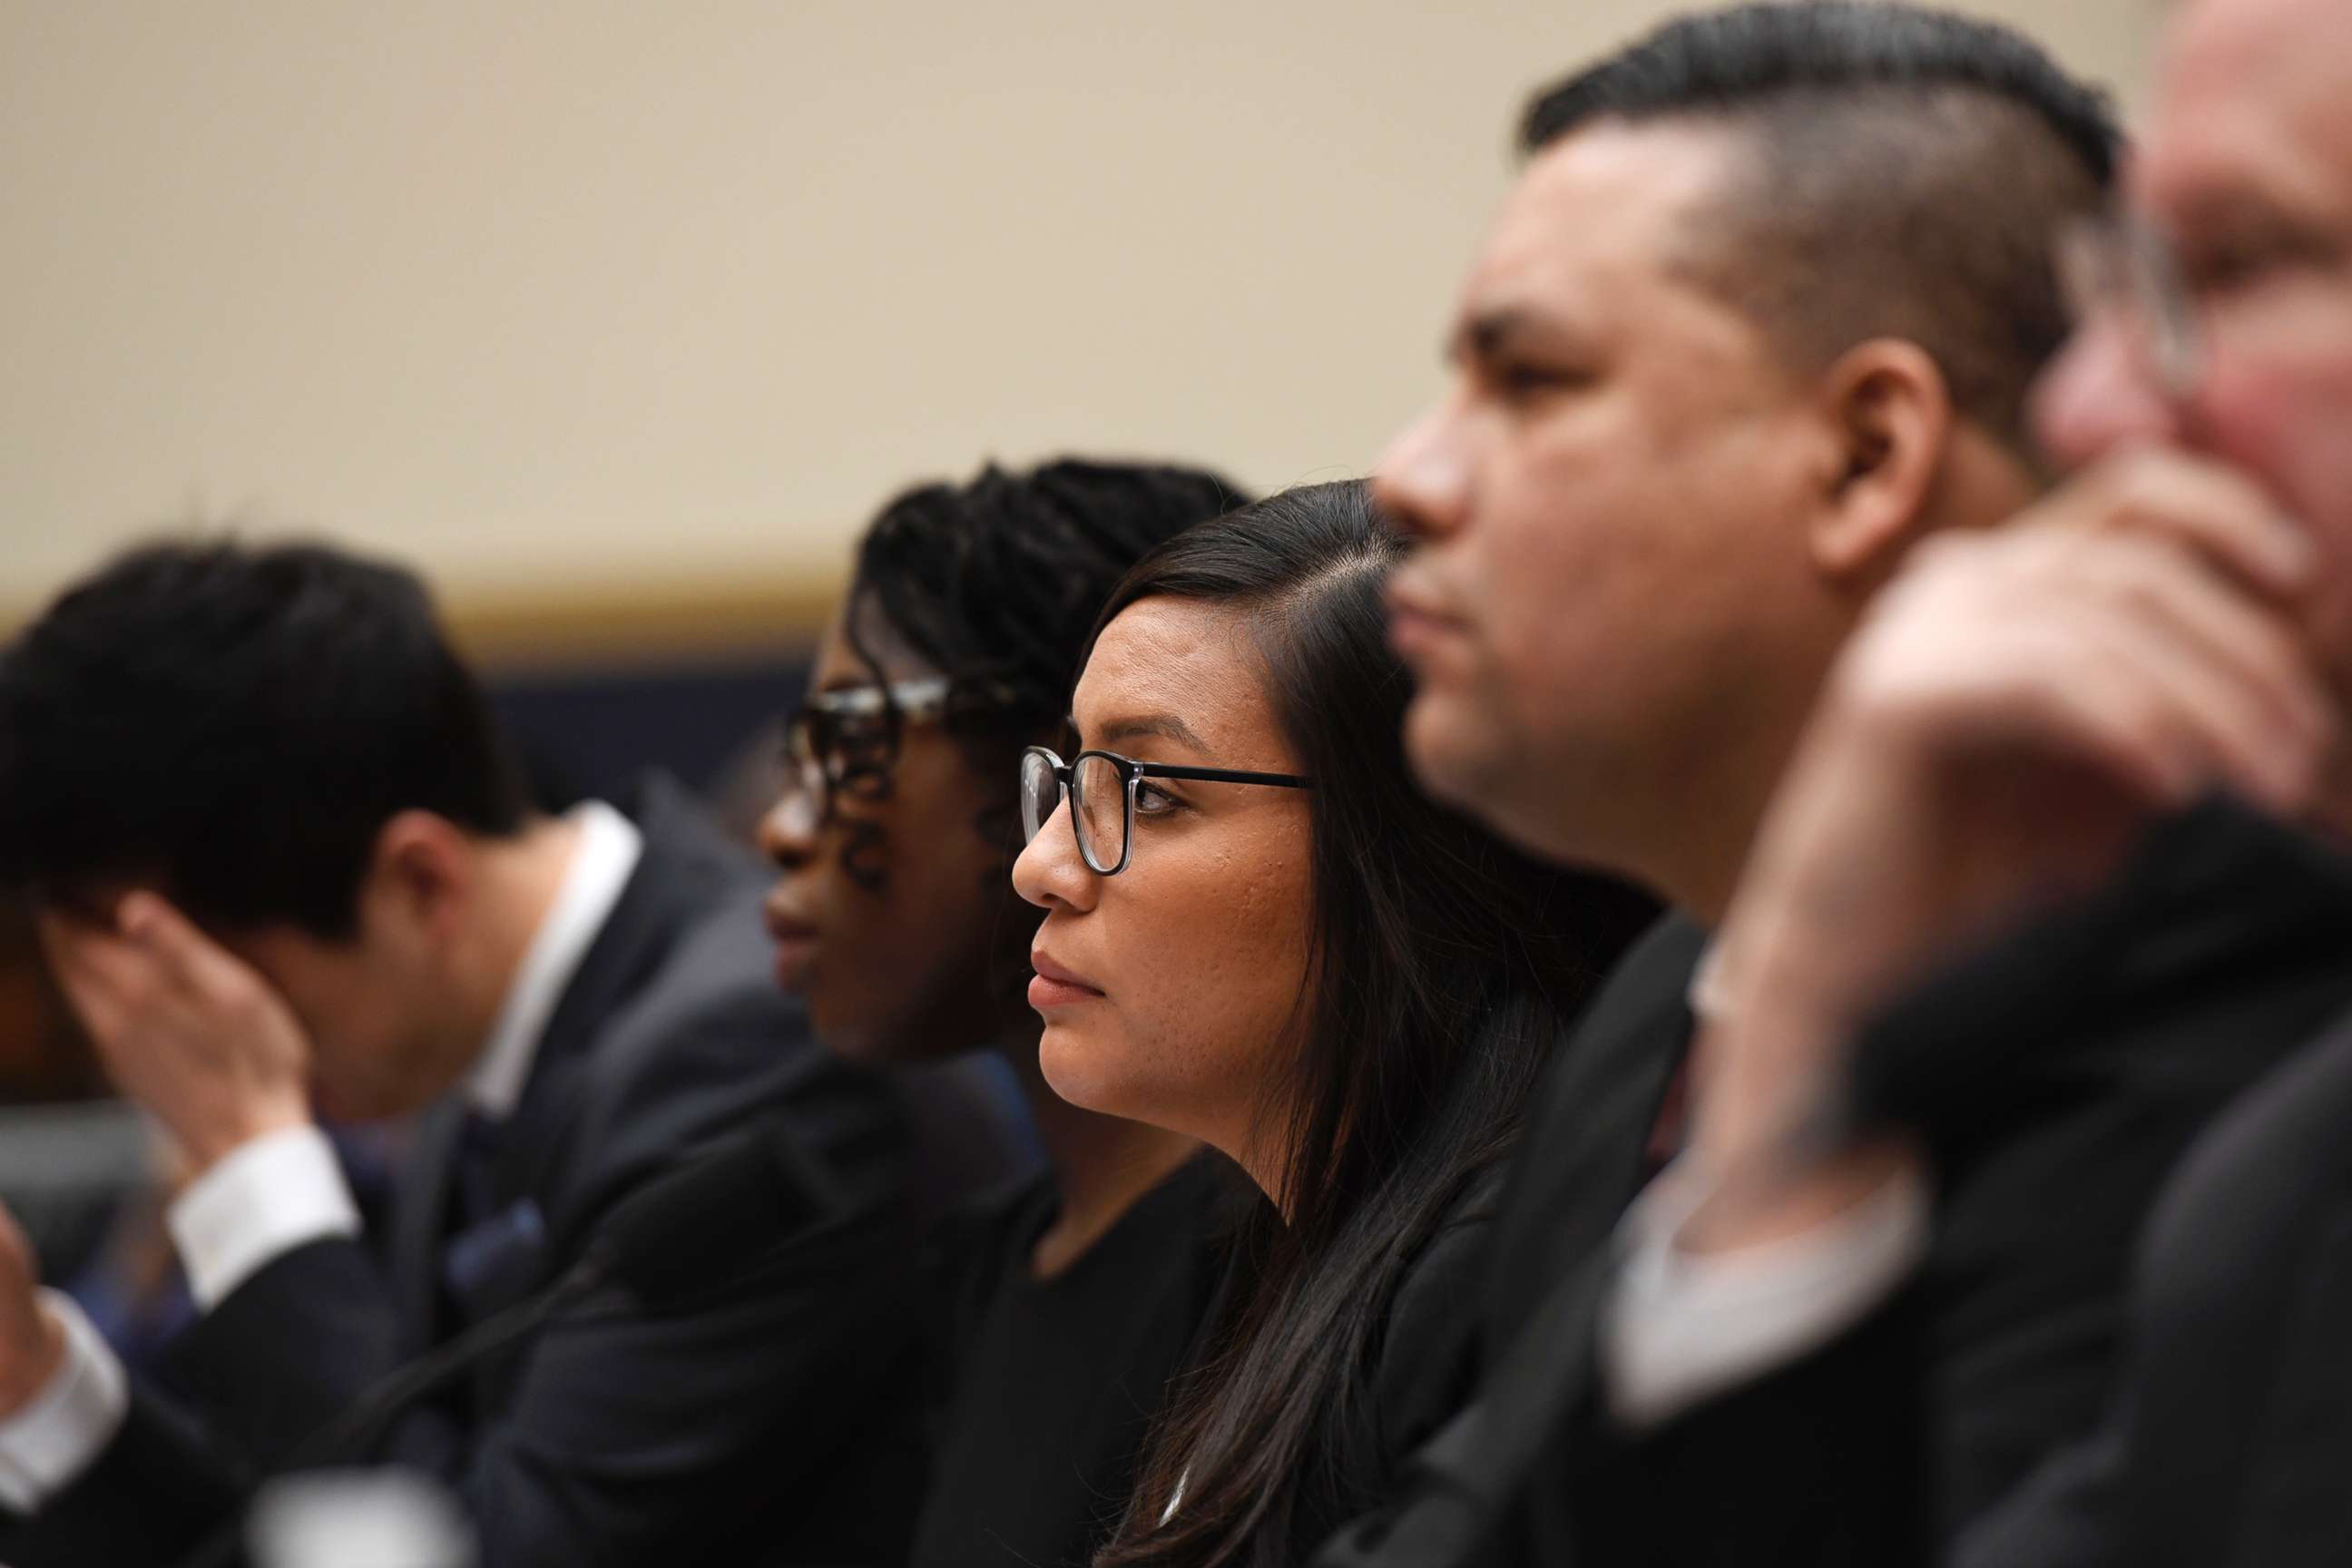 PHOTO: DACA recipient Yazmin Irazoqui Ruiz waits to testify at a House Judiciary Committee hearing on protections for Temporary Protected Status (TPS) recipients and DREAMers, on March 6, 2019, on Capitol Hill in Washington.